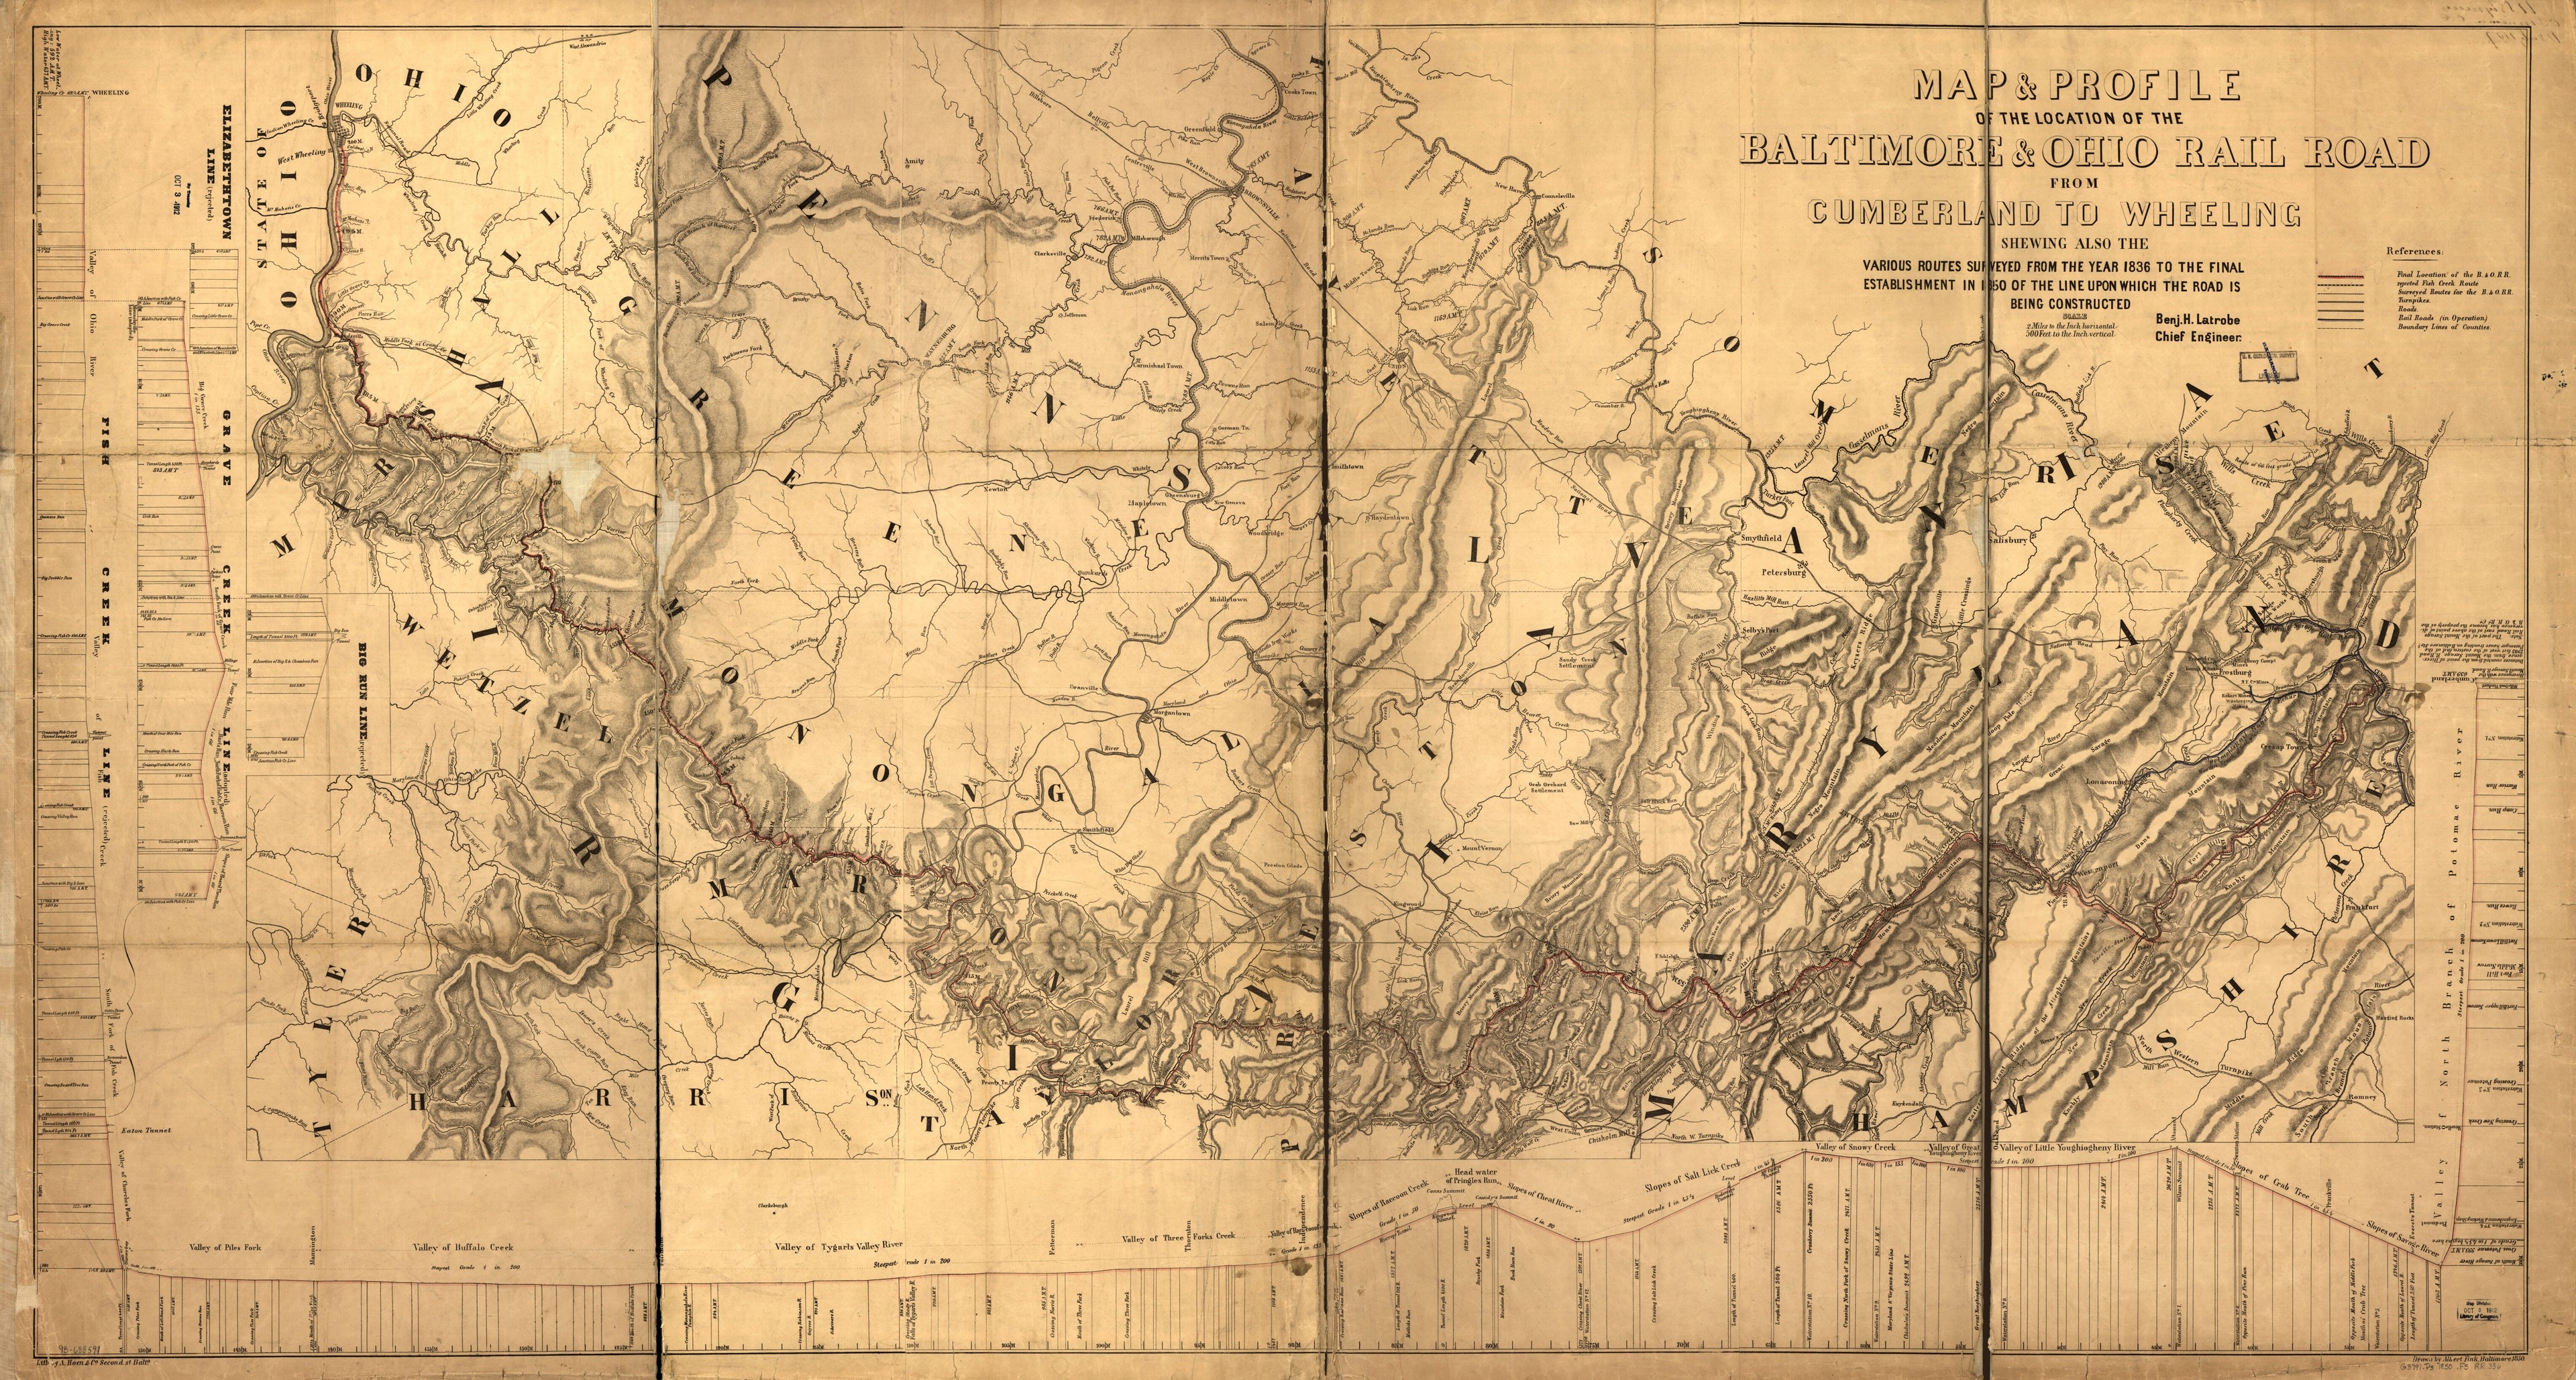 This old map of Map &amp; Profile of the Location of the Baltimore &amp; Ohio Rail Road from Cumberland to Wheeling Showing Also the Various Routes Surveyed from the 1836 to the Final Establishment In from 1850 of the Line Upon Which the Road Is Being Constructe